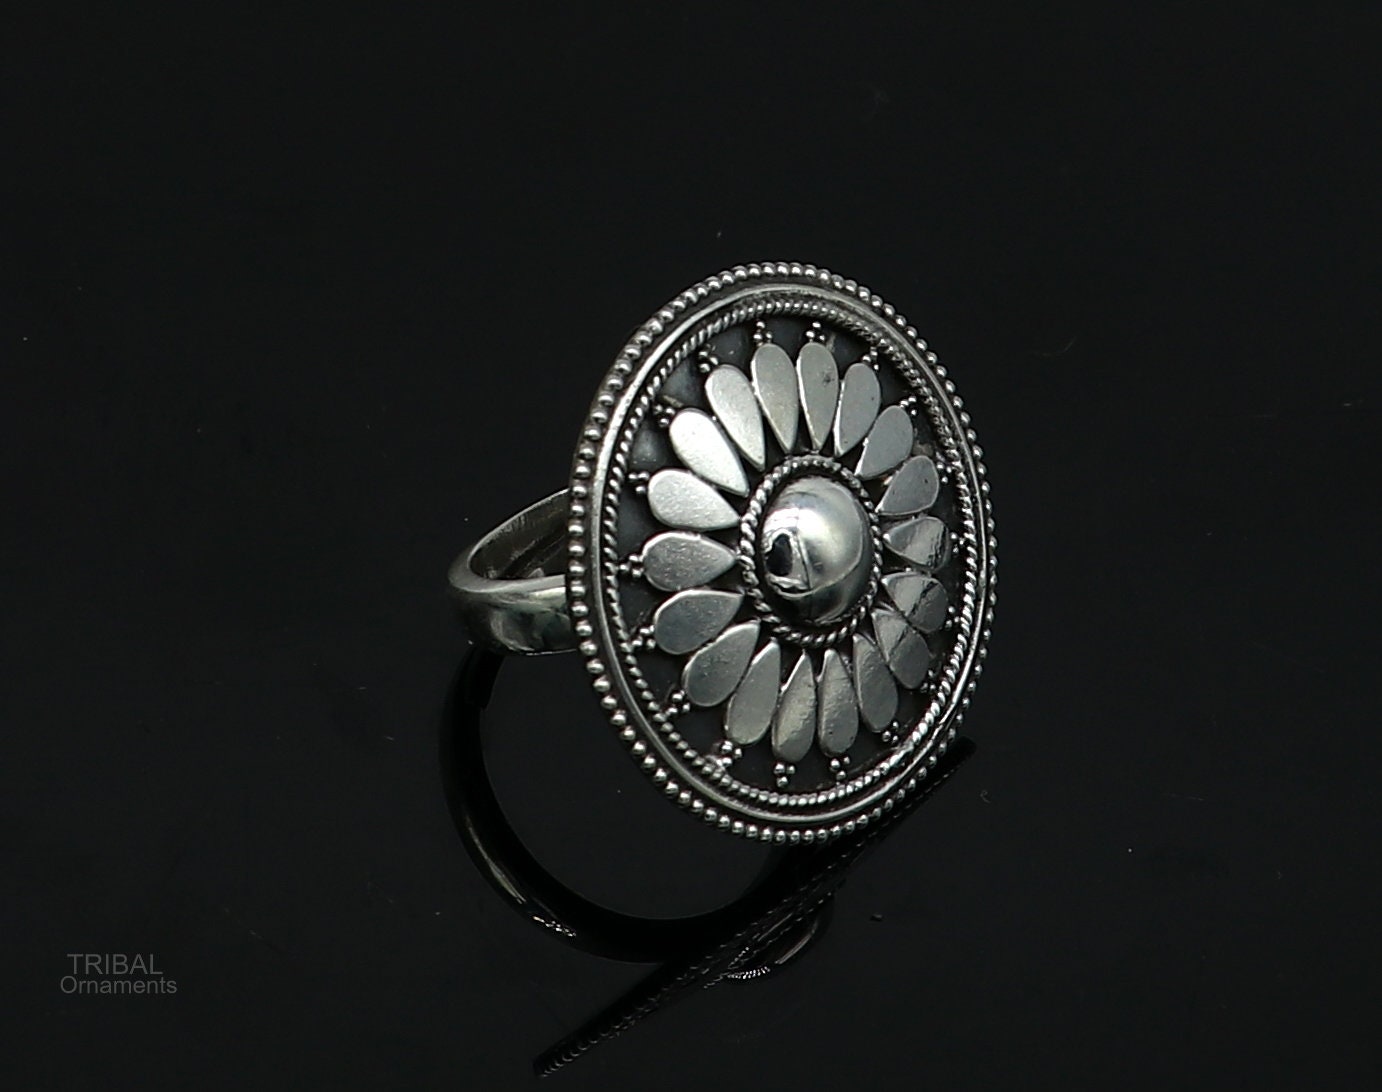 925 sterling silver handmade vintage antique style round rawa work charm ring band, best gifting brides wedding jewelry india sr310 - TRIBAL ORNAMENTS